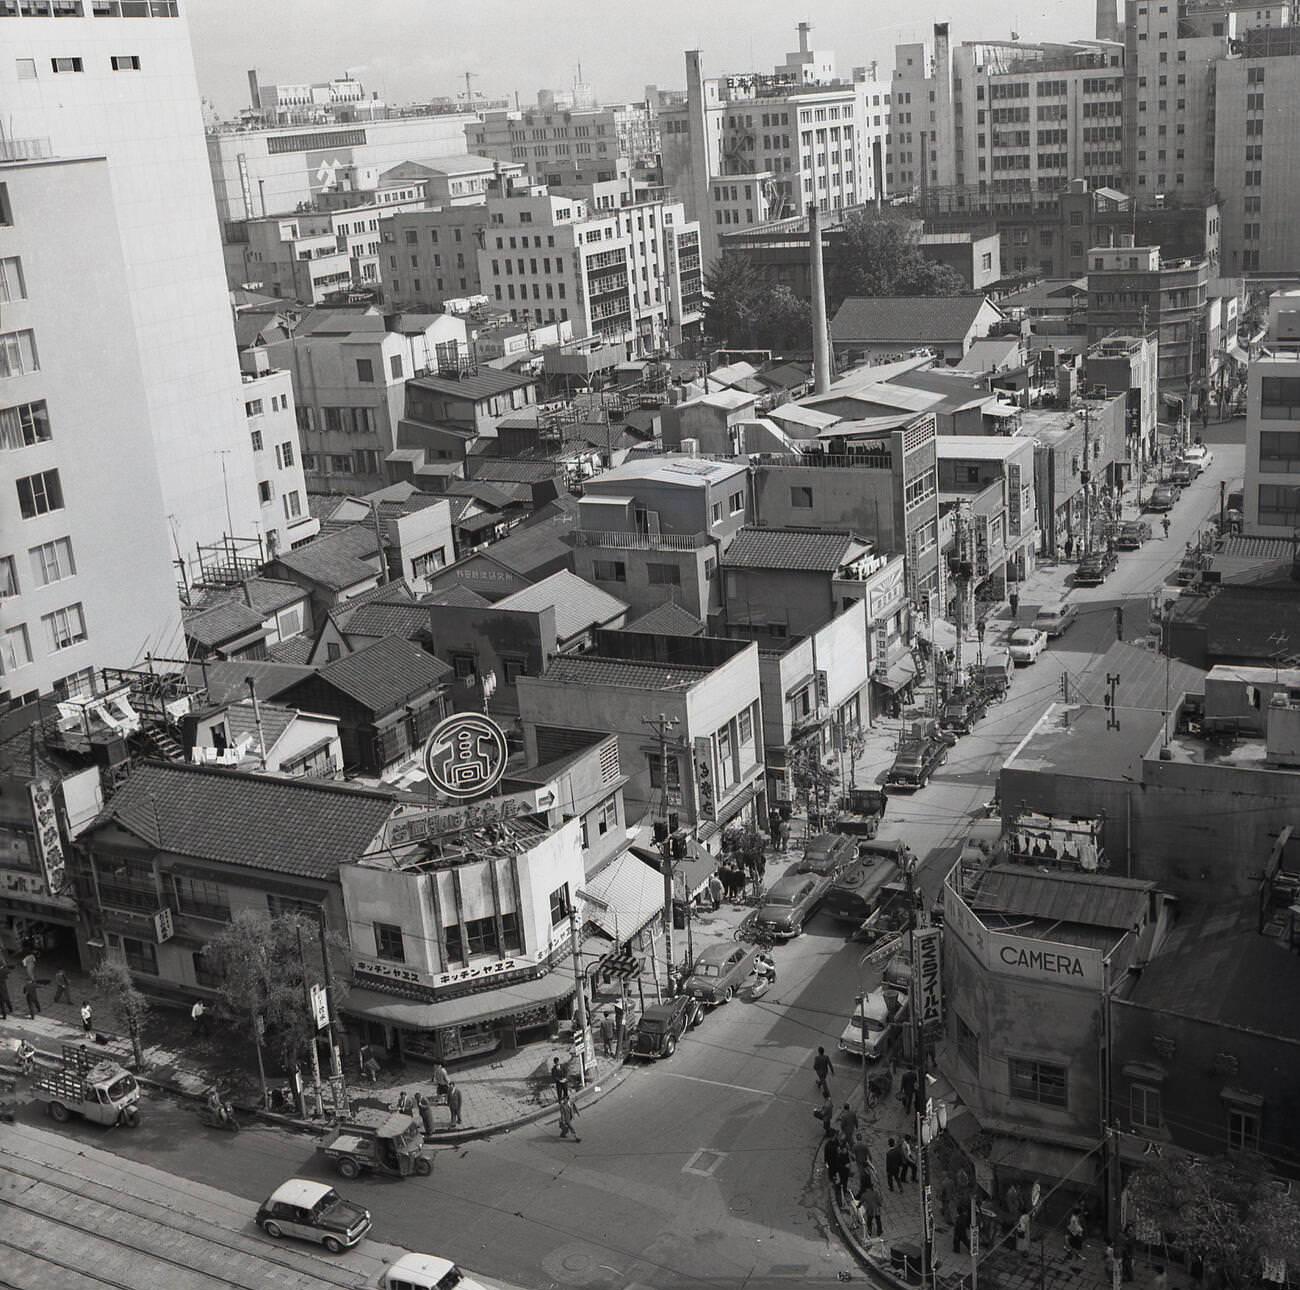 An aerial photo showing the low-rise 'old town' in Tokyo, 1950s.